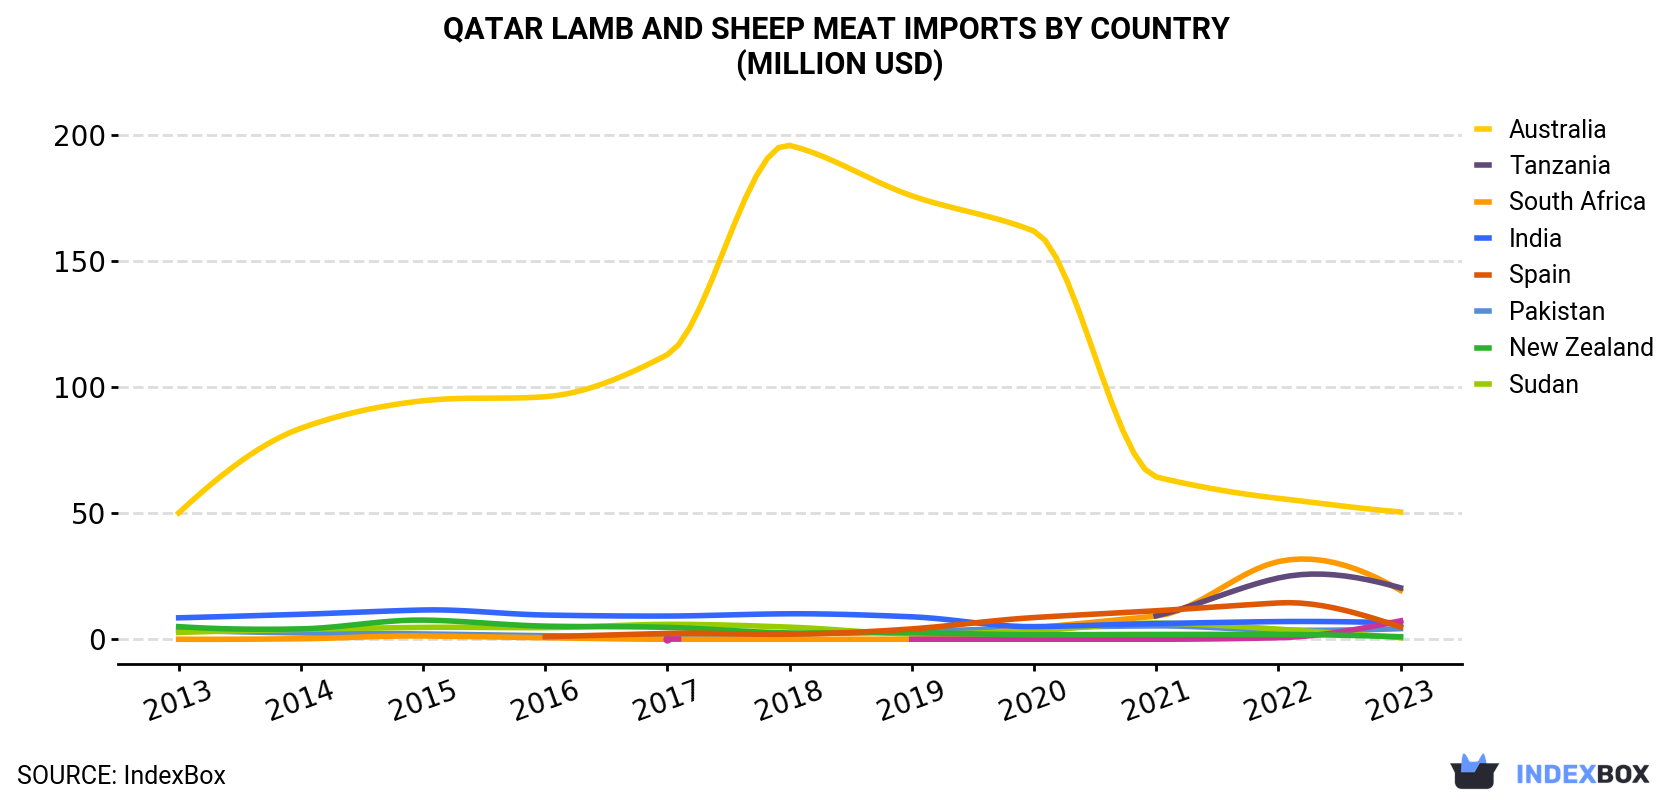 Qatar Lamb and Sheep Meat Imports By Country (Million USD)